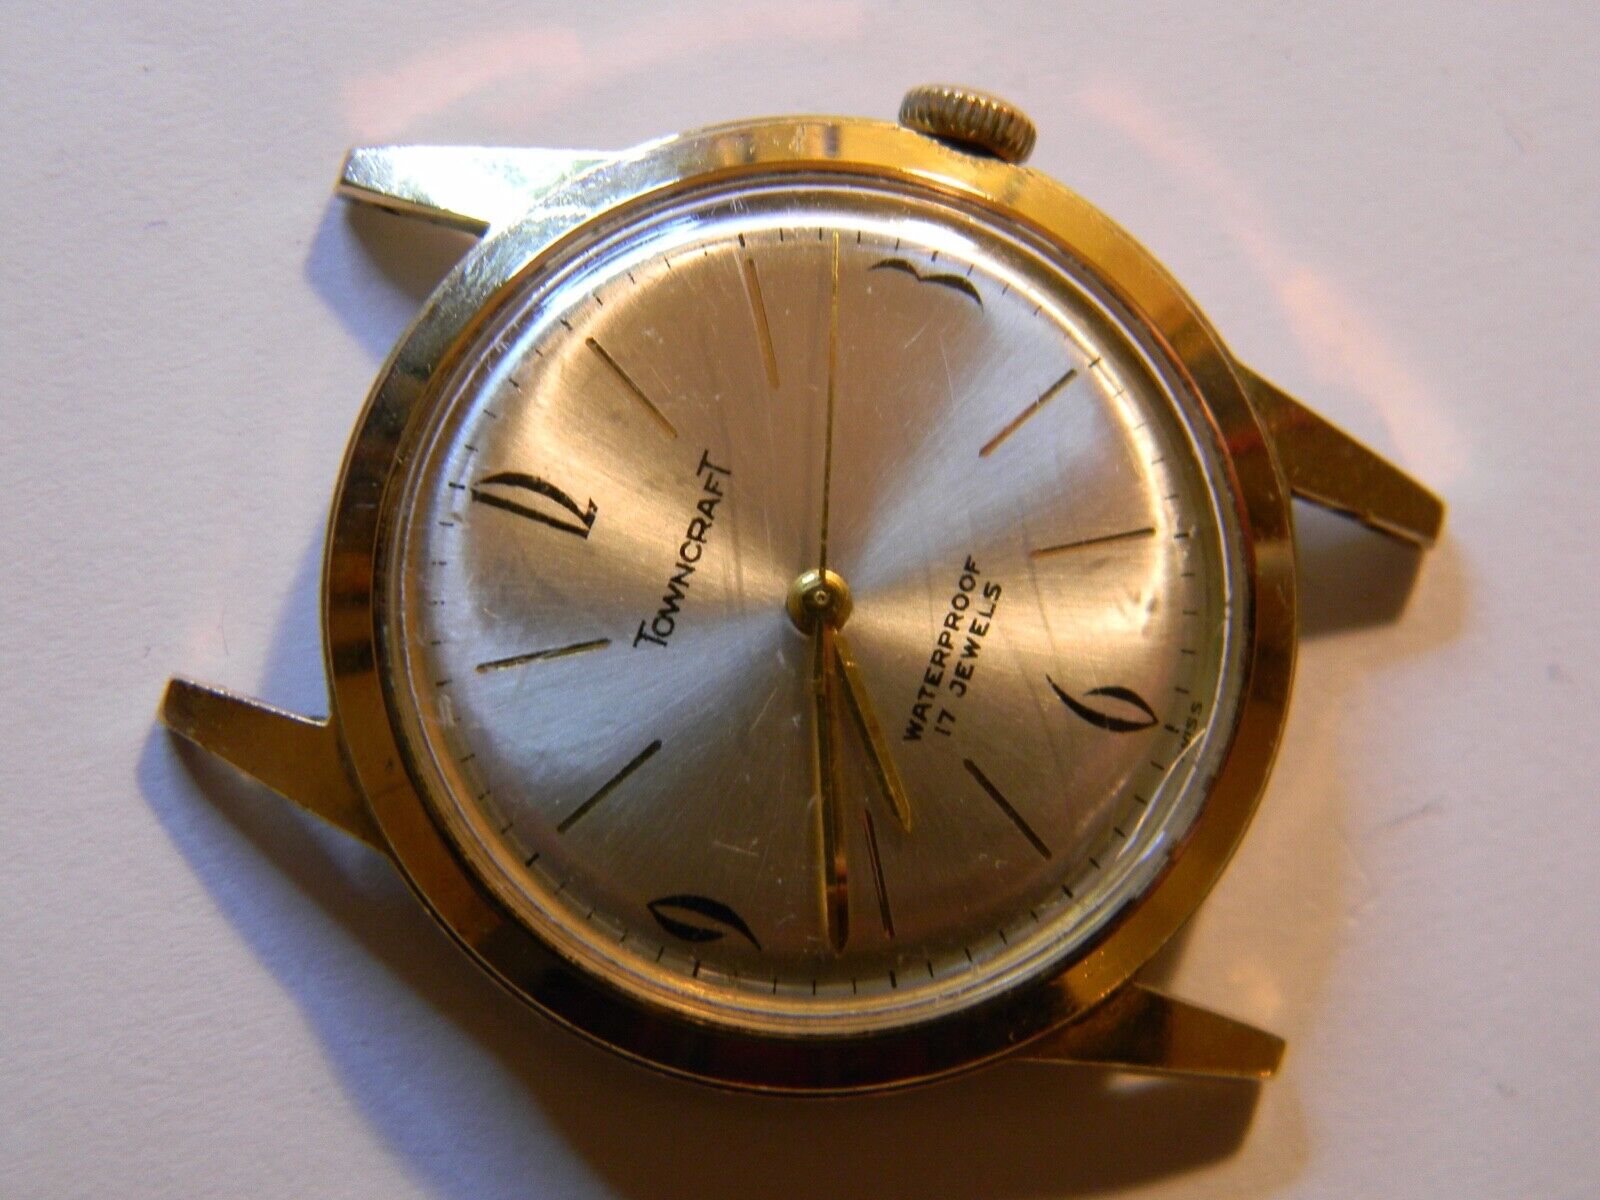 NICE VINTAGE 1960's SWISS TOWNCRAFT 17J GOLD PLATED MENS WATCH - RUNS GOOD TIMER